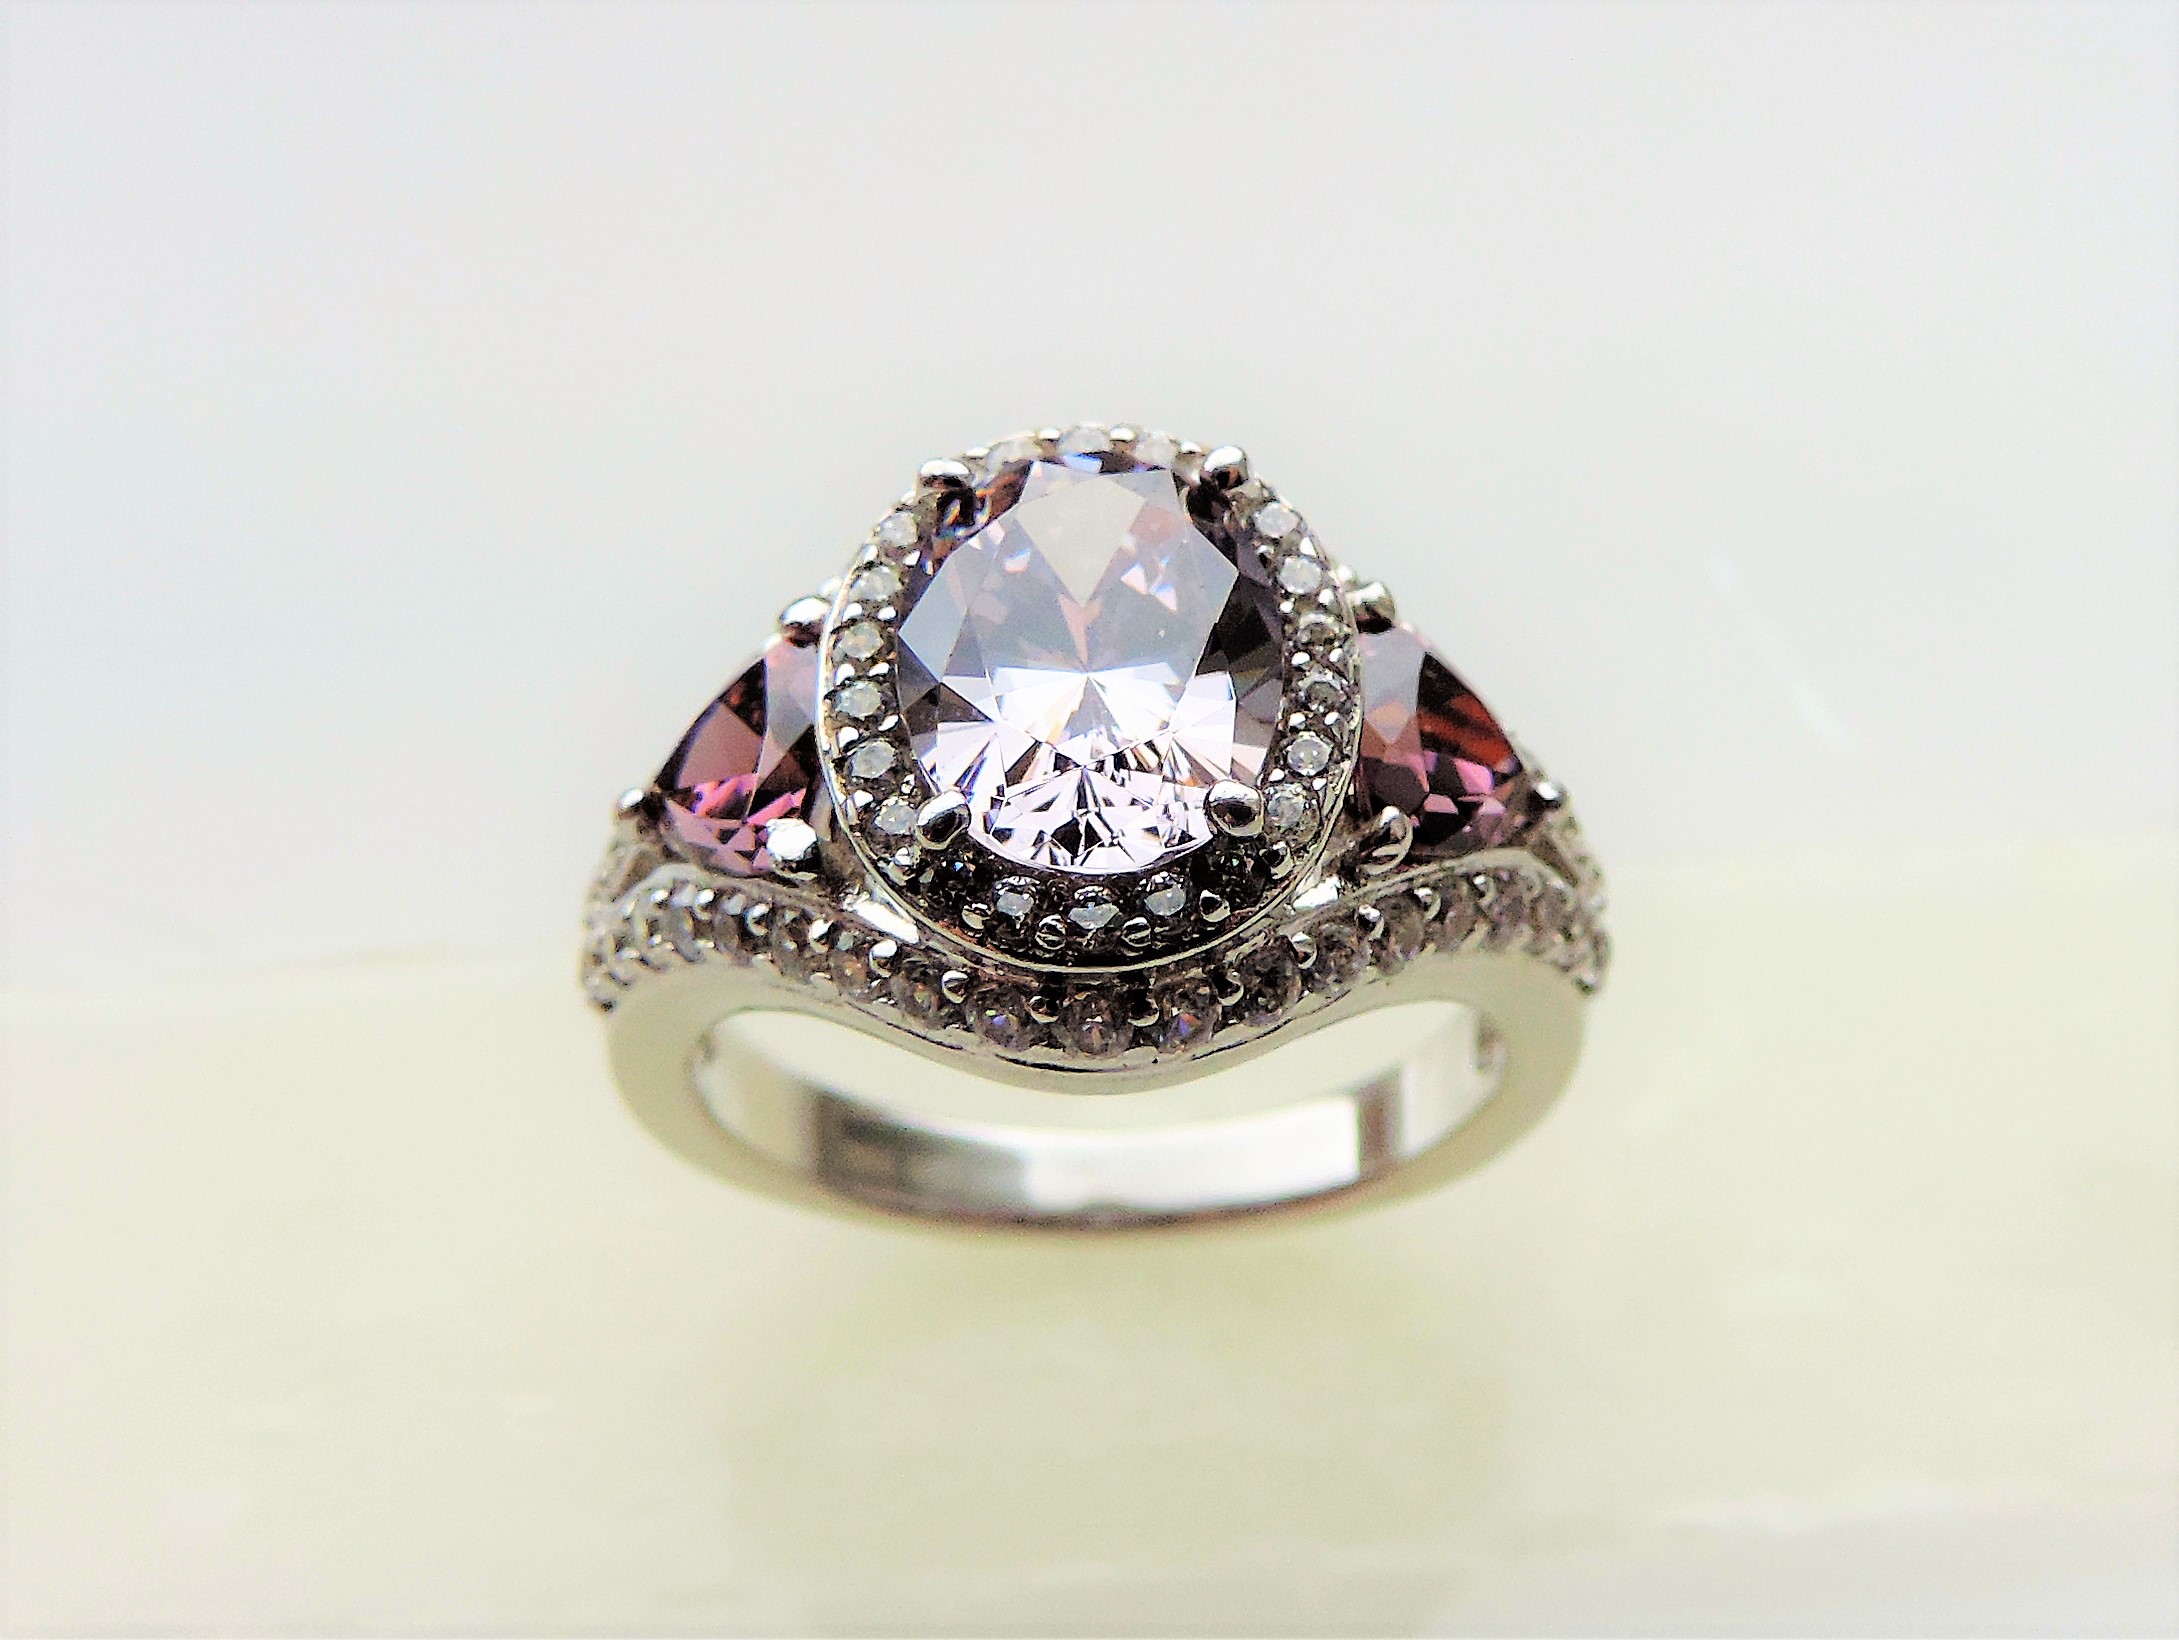 Sterling Silver Pink & White Topaz Ring - Image 3 of 5